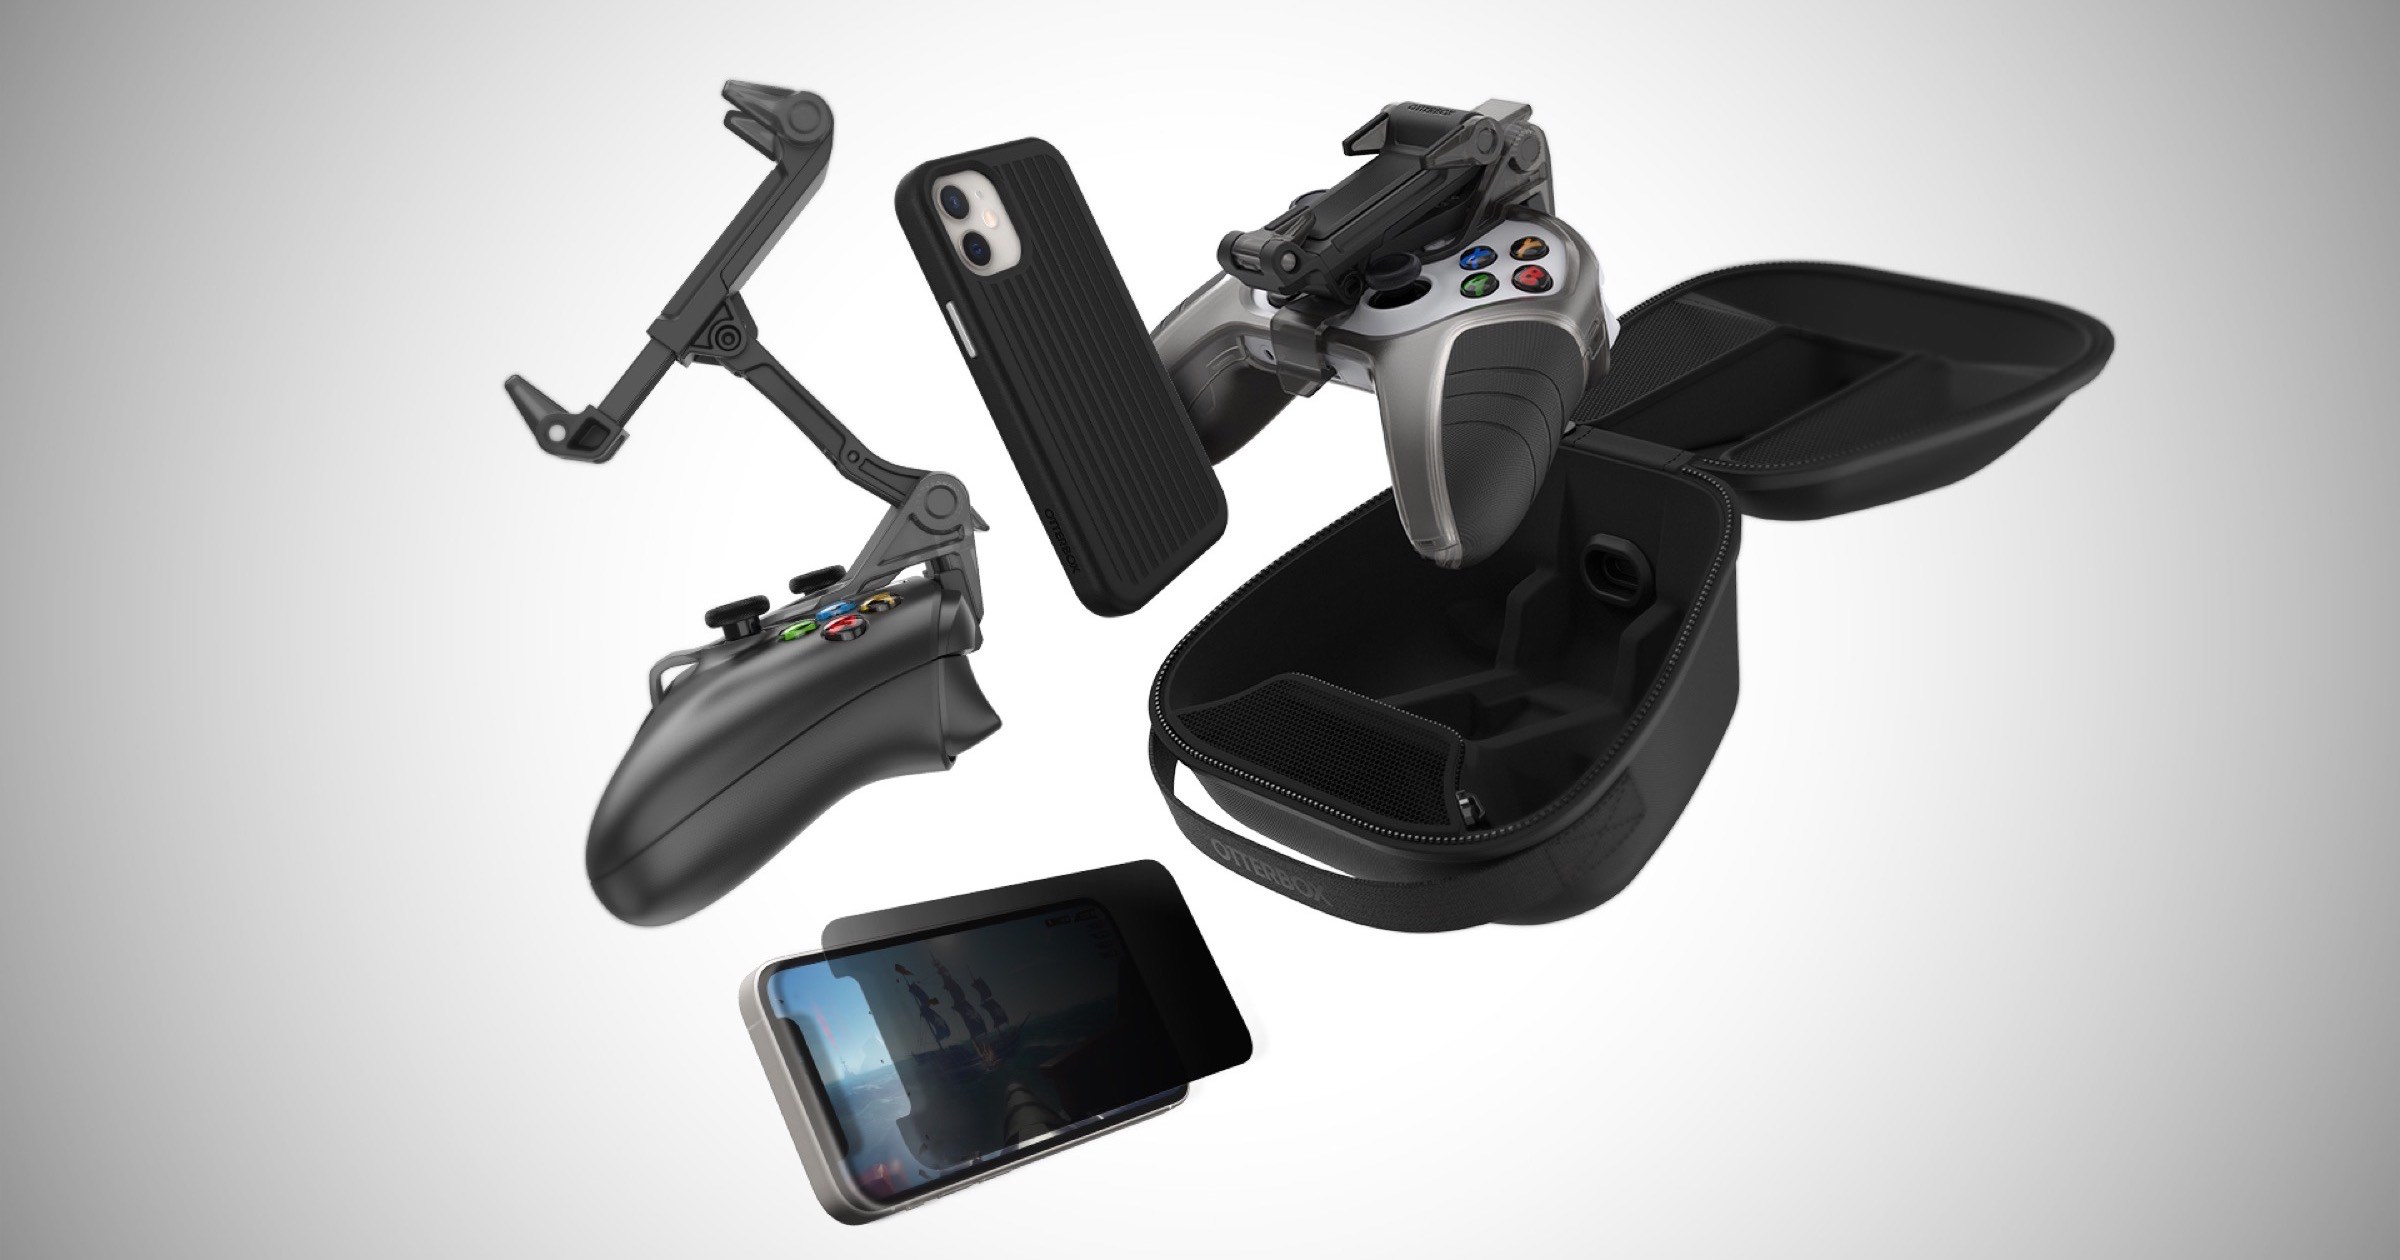 Otterbox gaming accessories